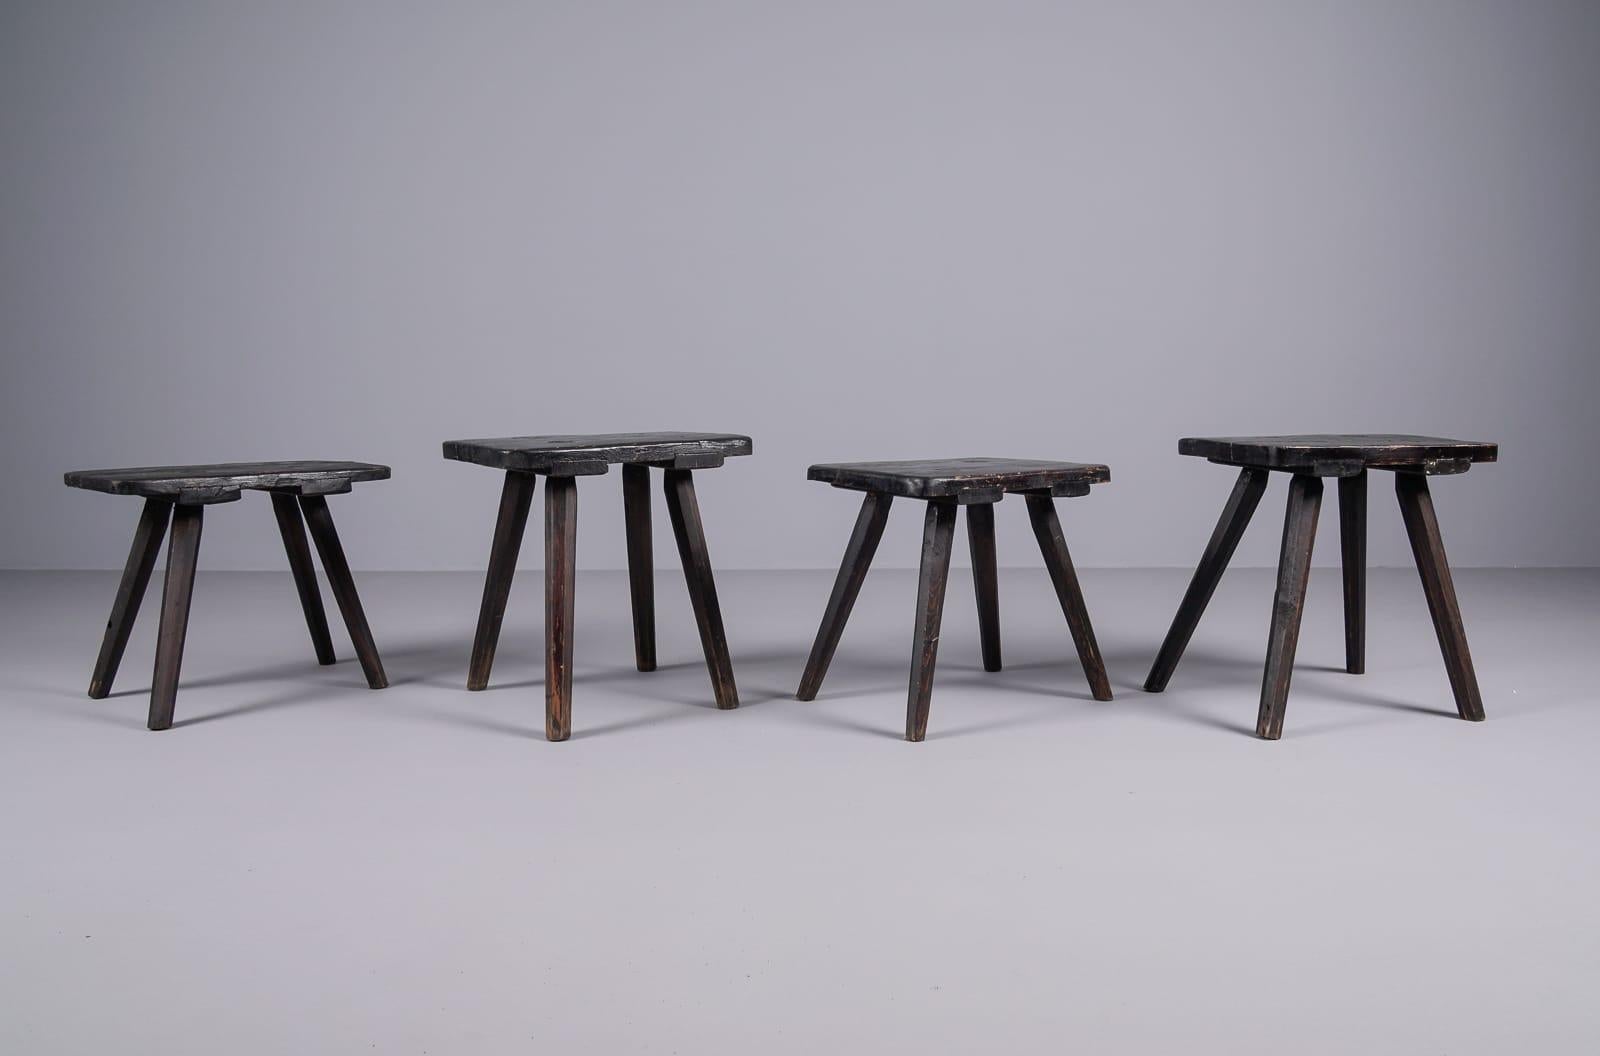 Set of 4 beautifully shaped old wooden stools, 1950s 

The original black color makes the stools elegant and slim.

Two different seat heights. 2 x 38cm and 2 x 42cm.